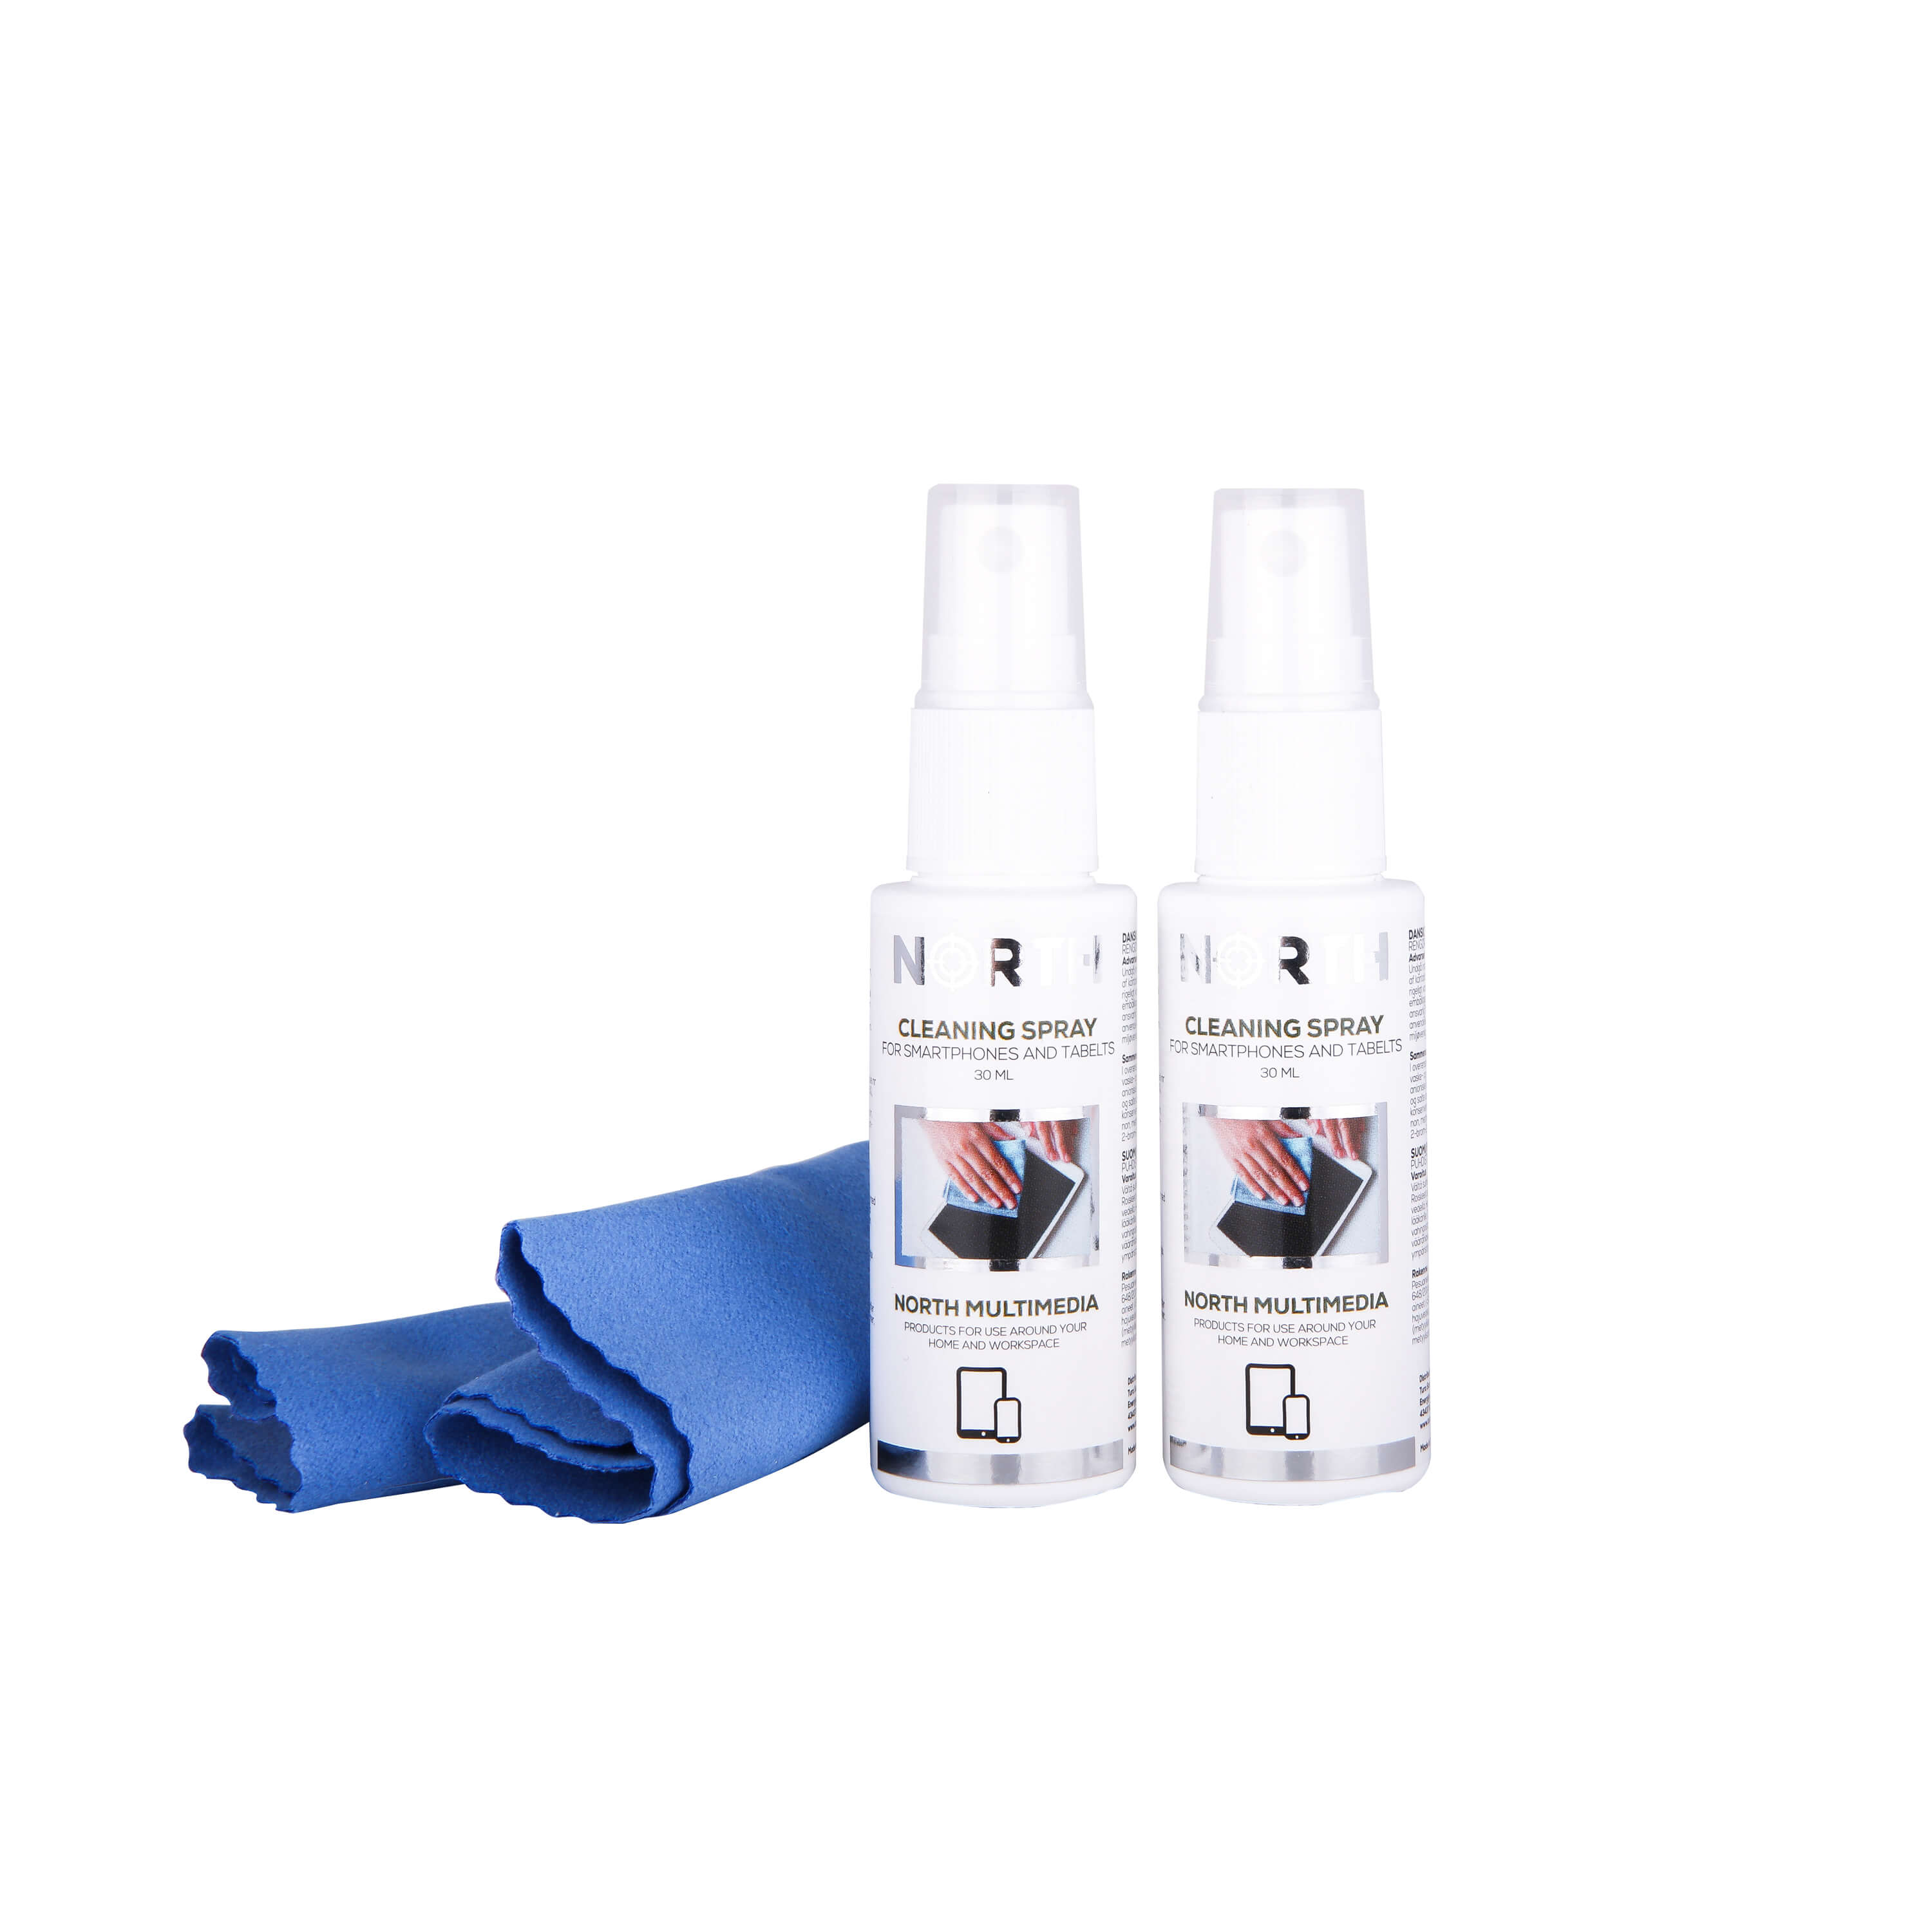 Cleaning kit for mobile and tablet